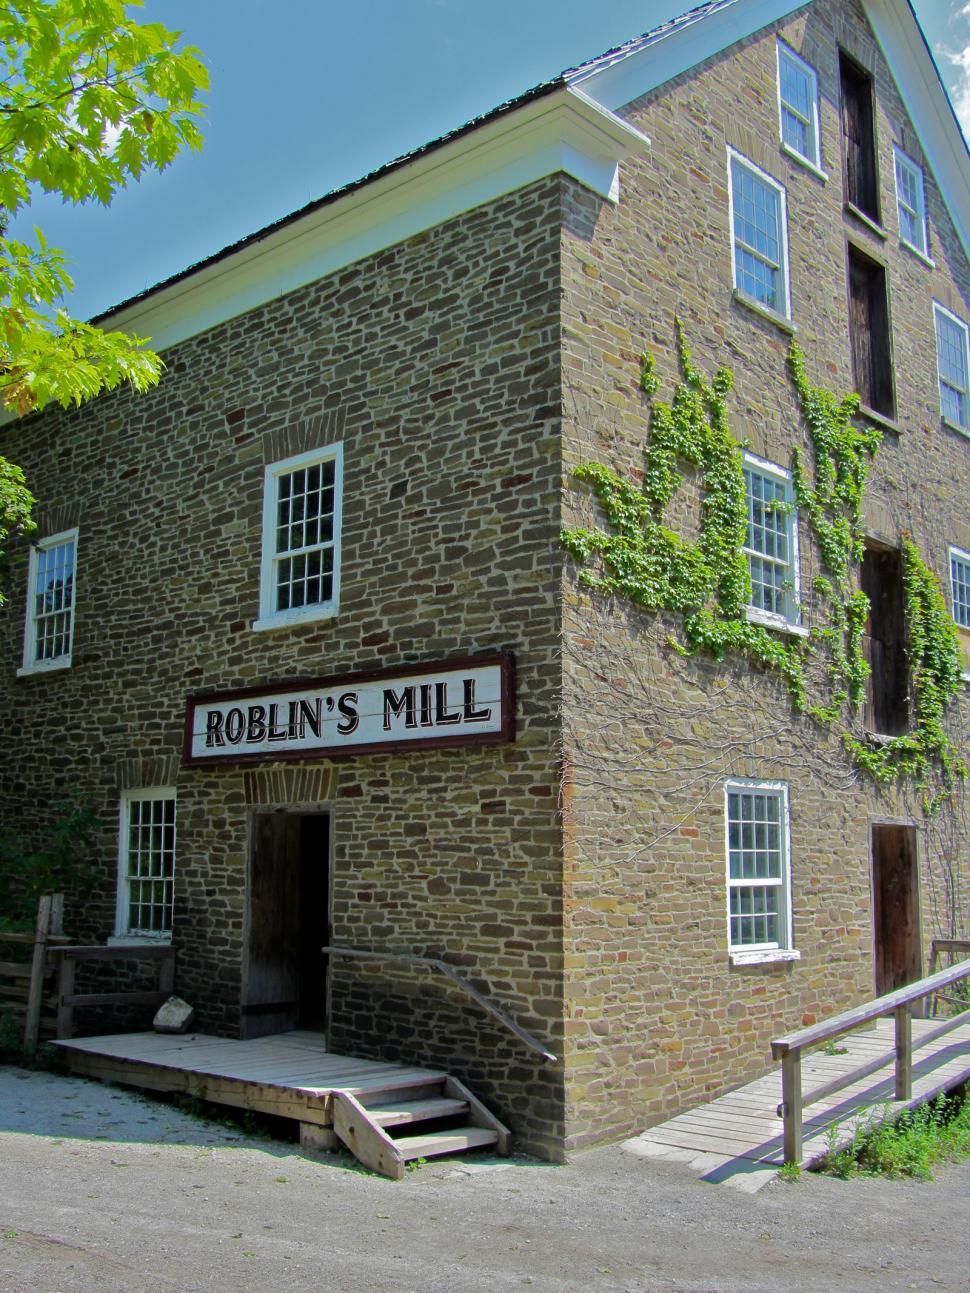 Free Image of Brick Building With a Sign for Robins Mill 